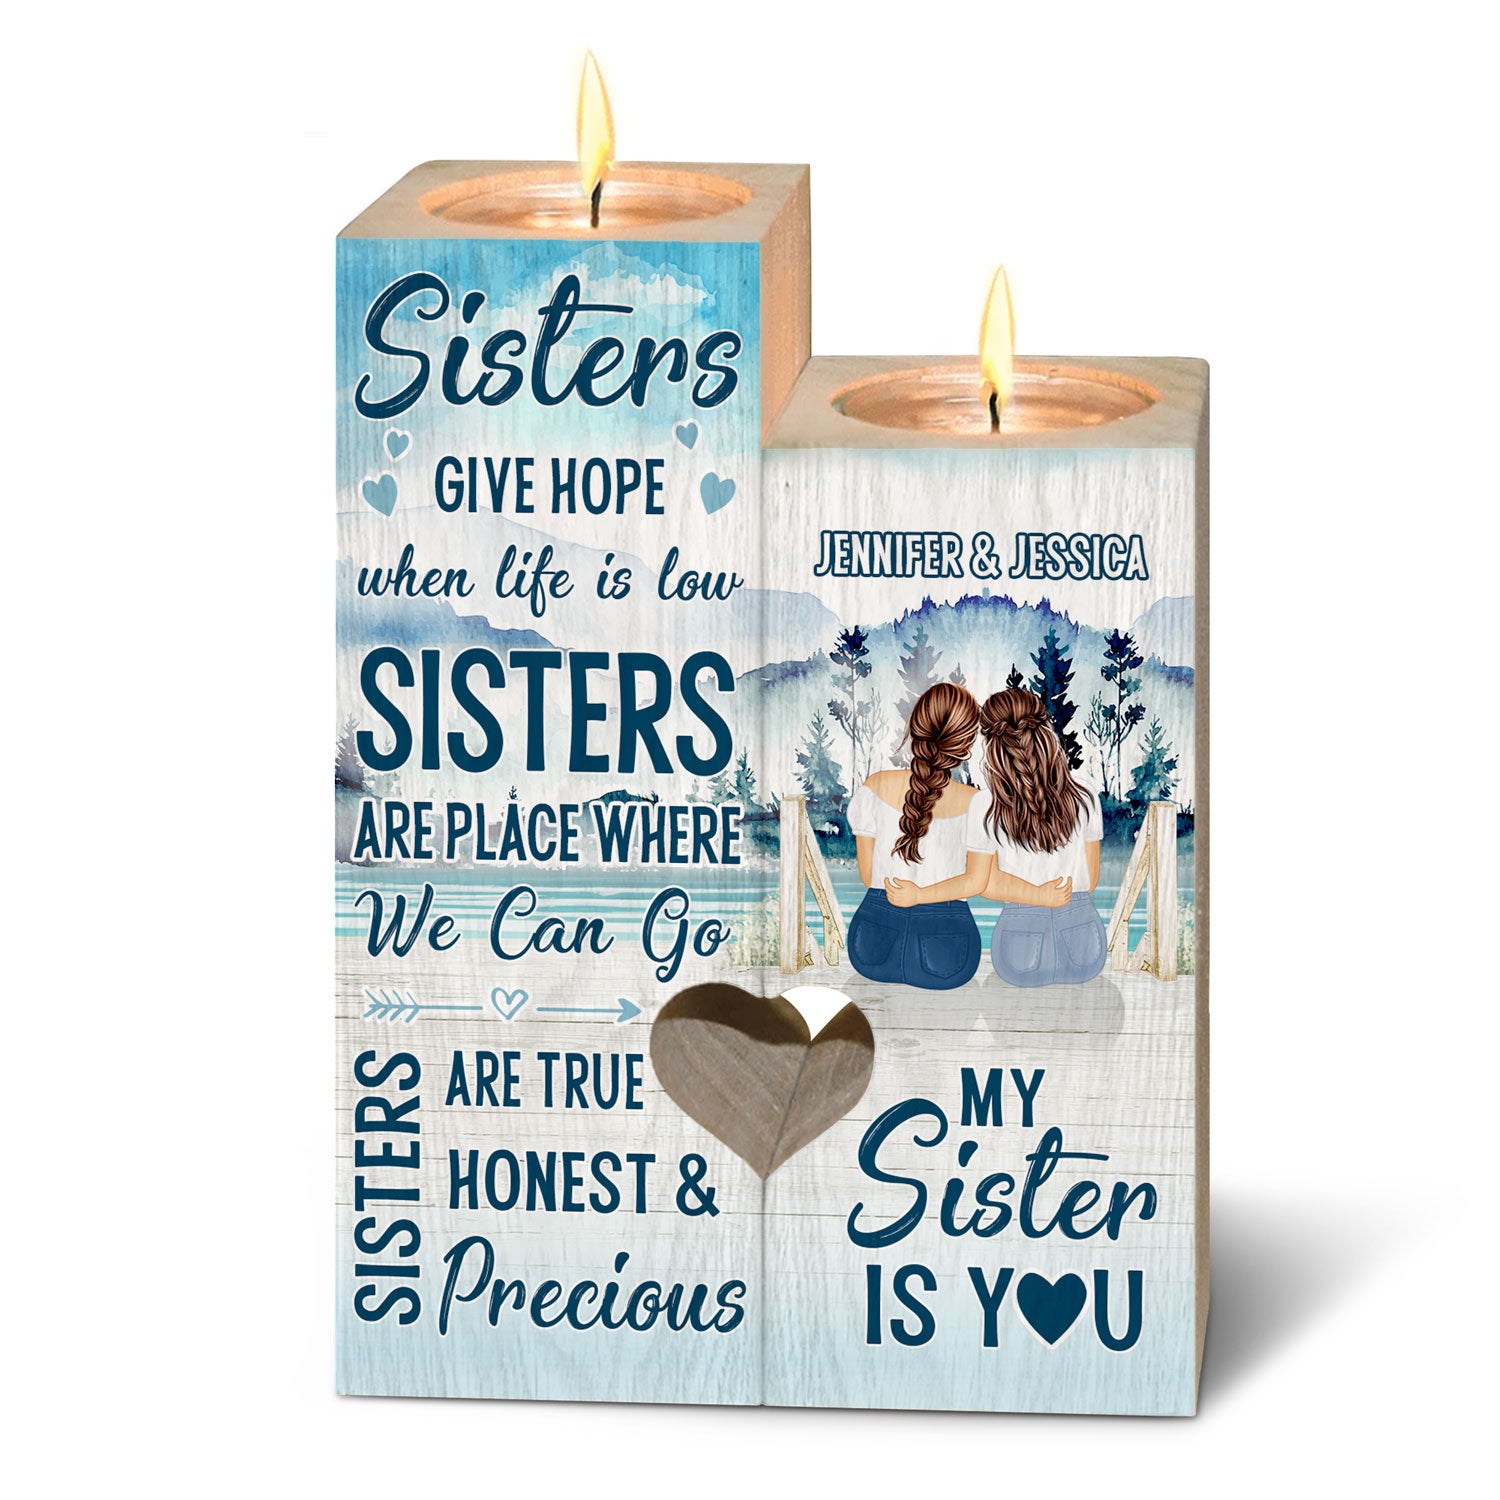 My Sister Is You - Gift For Sisters - Personalized Custom Candle Holder